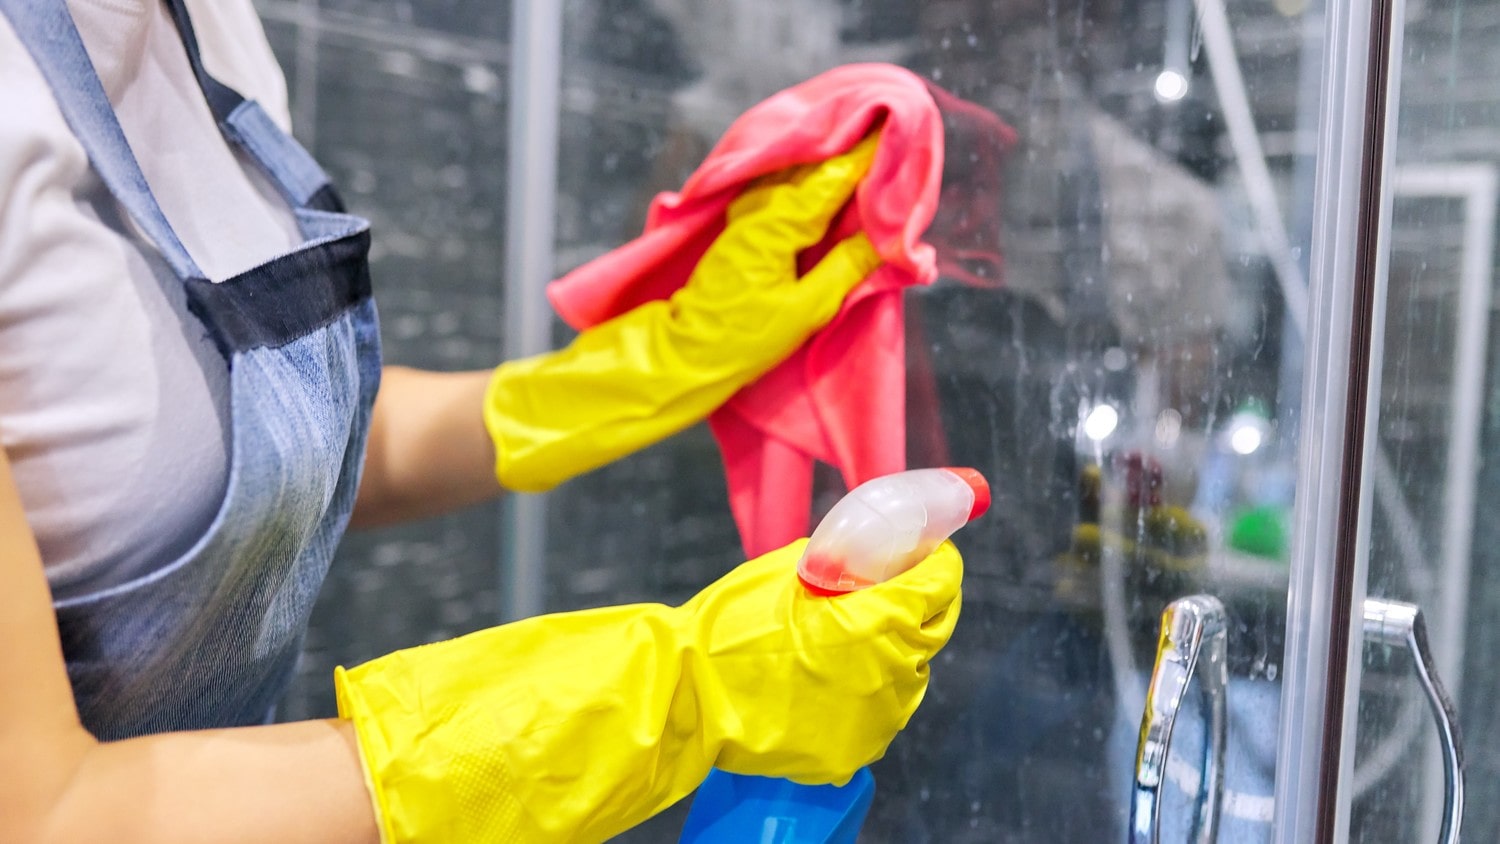 A person cleaning a shower glass with a spray bottle and cleaning clothe.